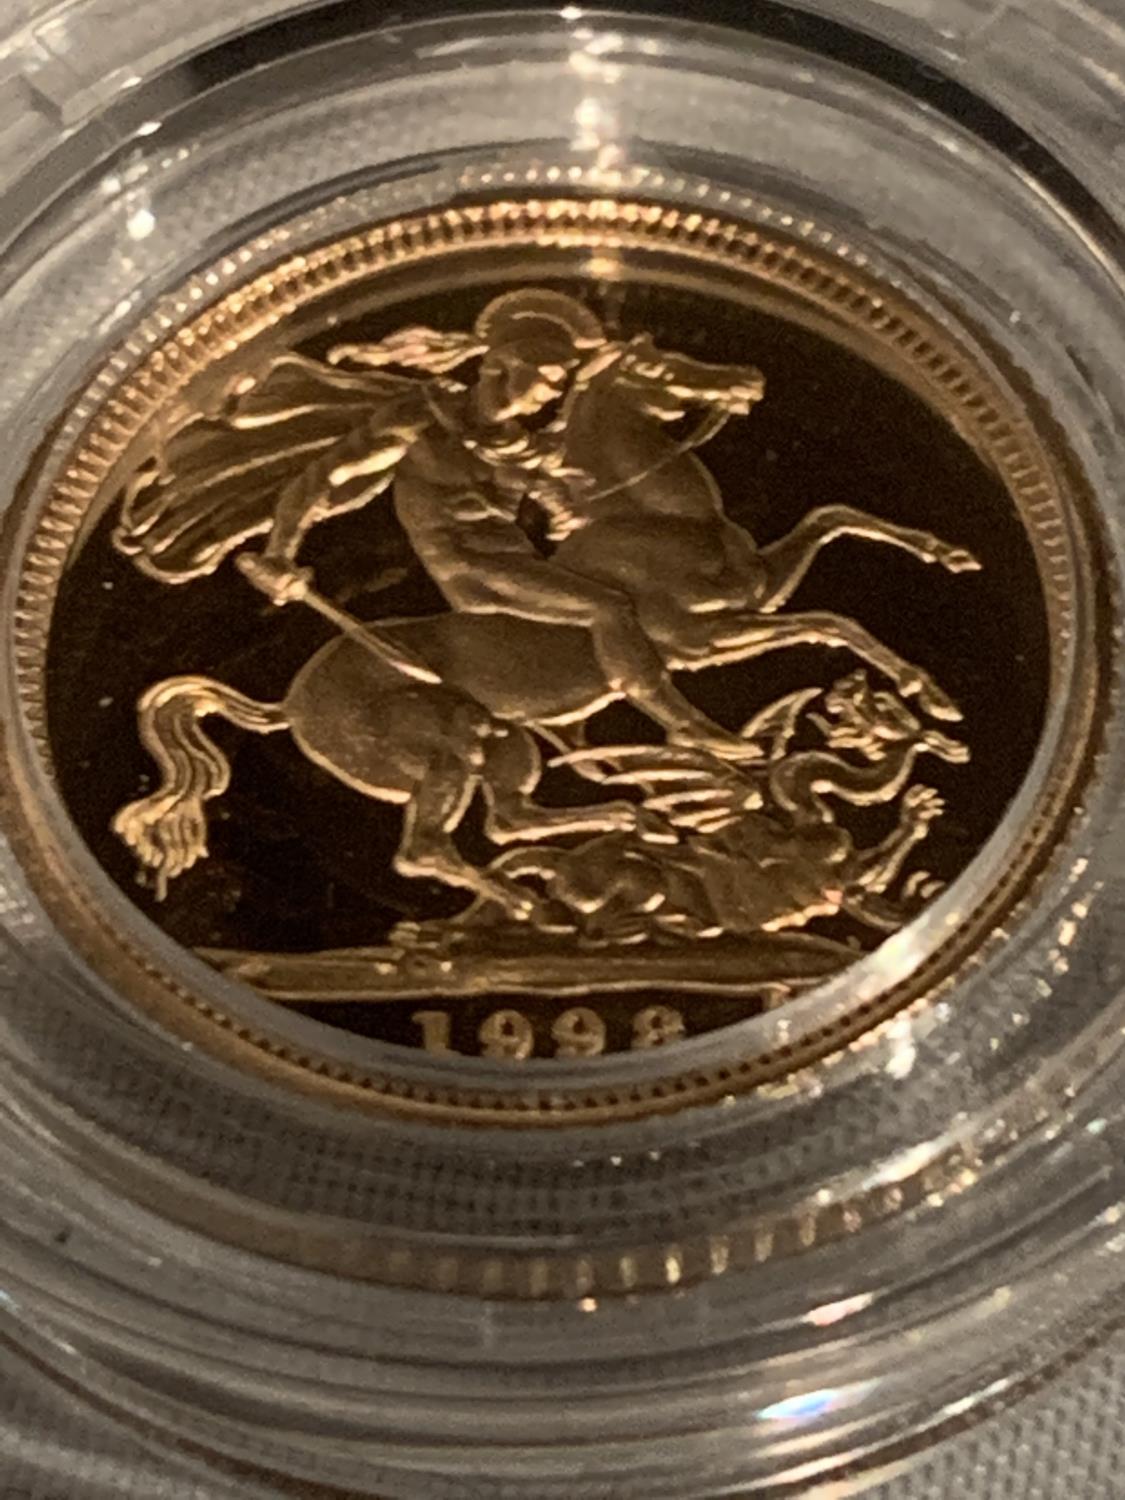 A 1998 GOLD PROOF HALF SOVEREIGN IN PRESENTATION CASE WITH CERTIFICATE - Image 2 of 3